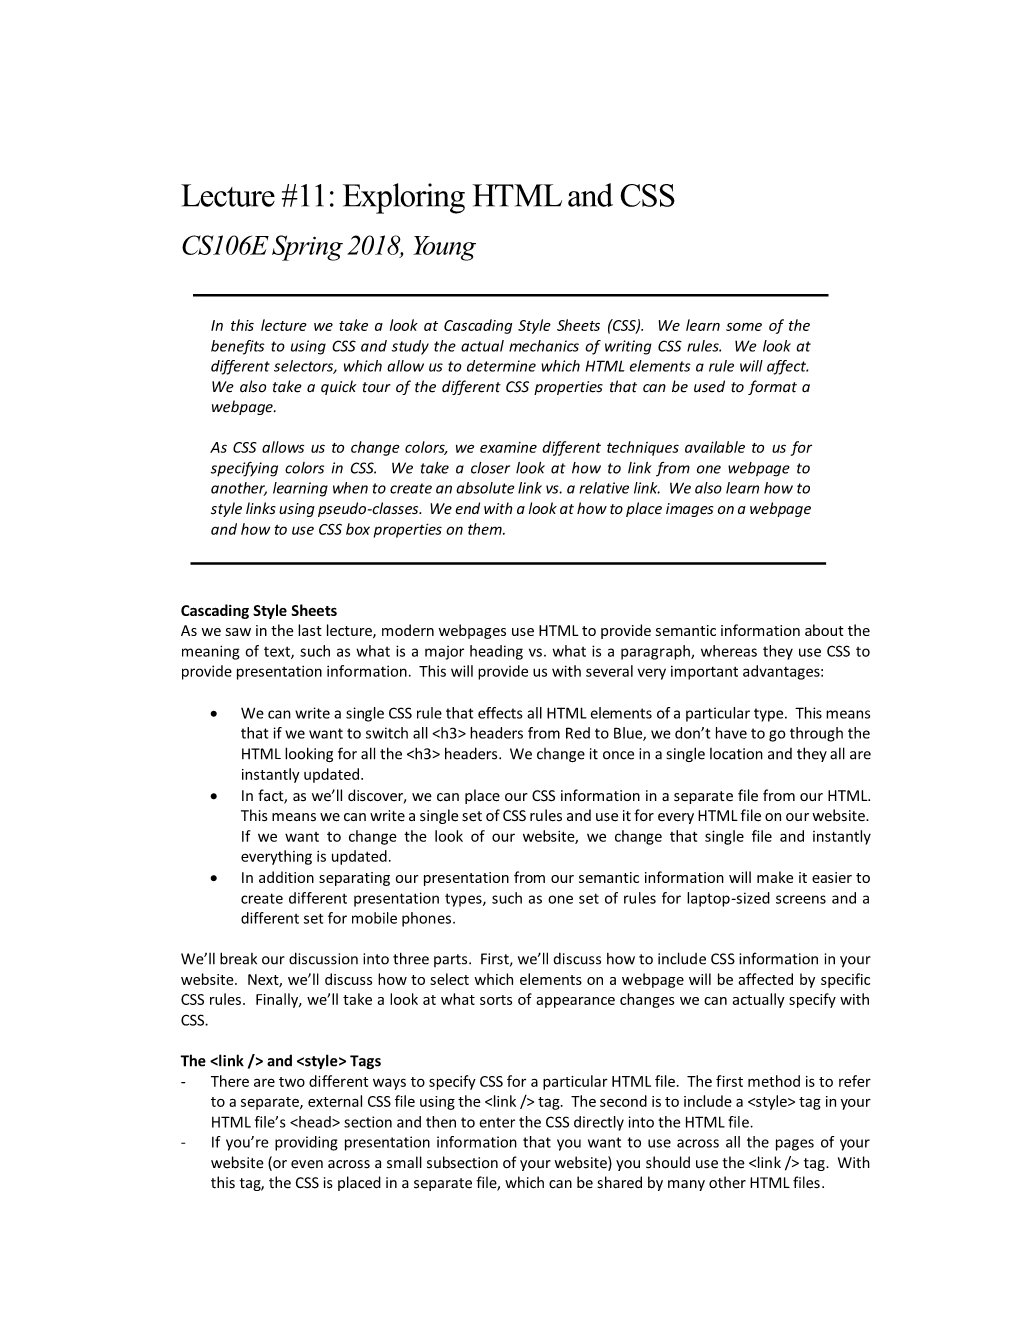 L11N Exploring HTML And